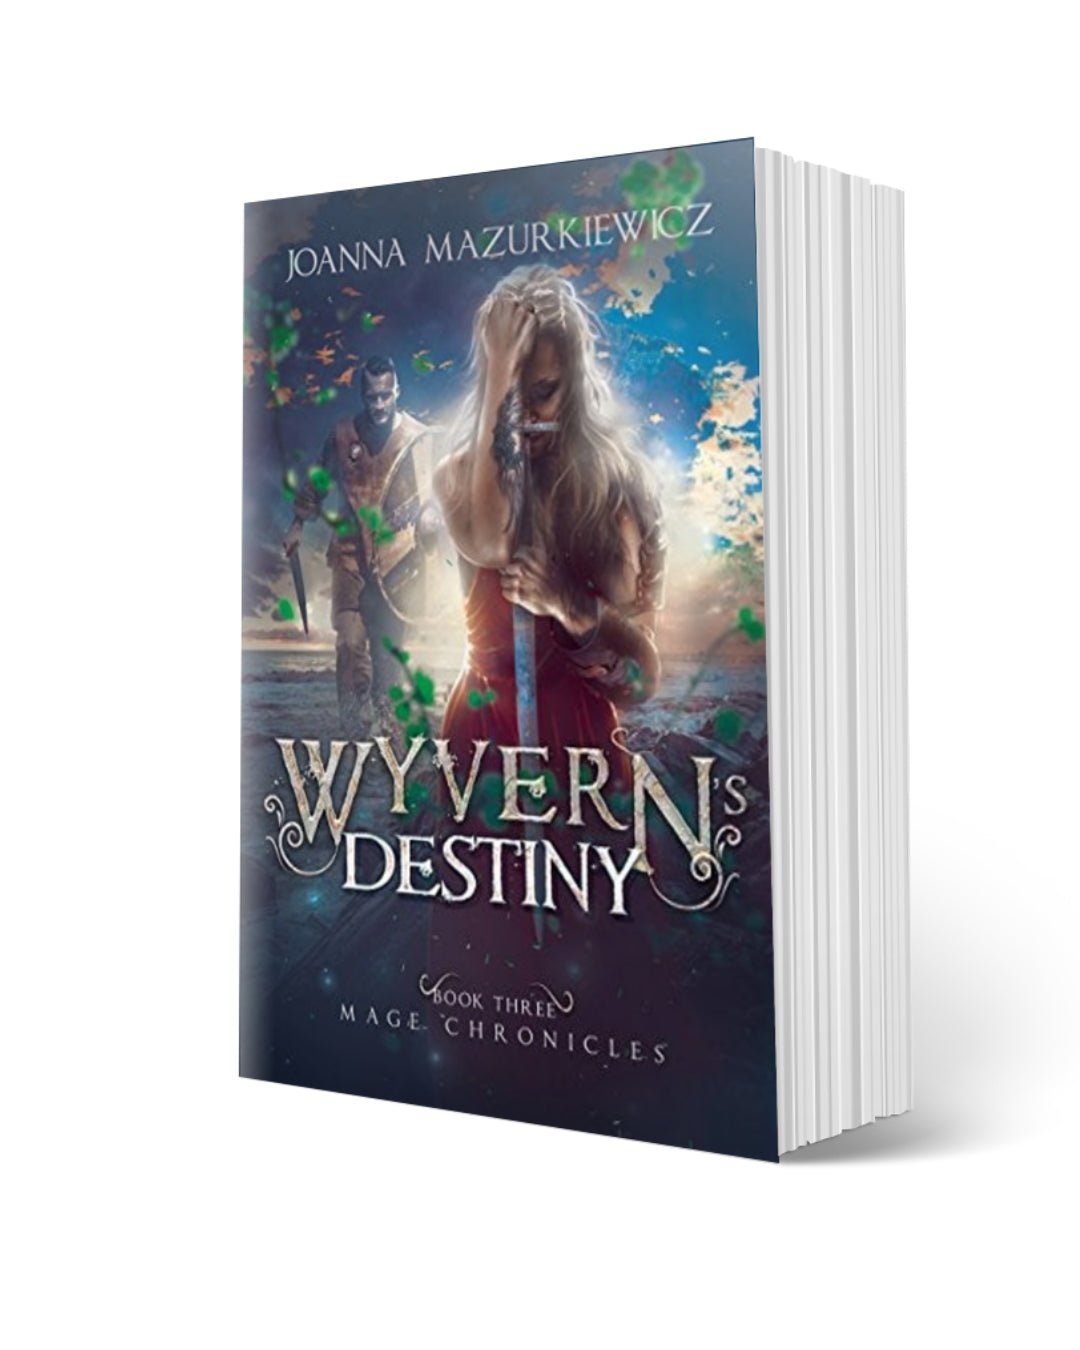 Paperback Copy of Wyvern's Destiny (Mage Chronicles Book 4)